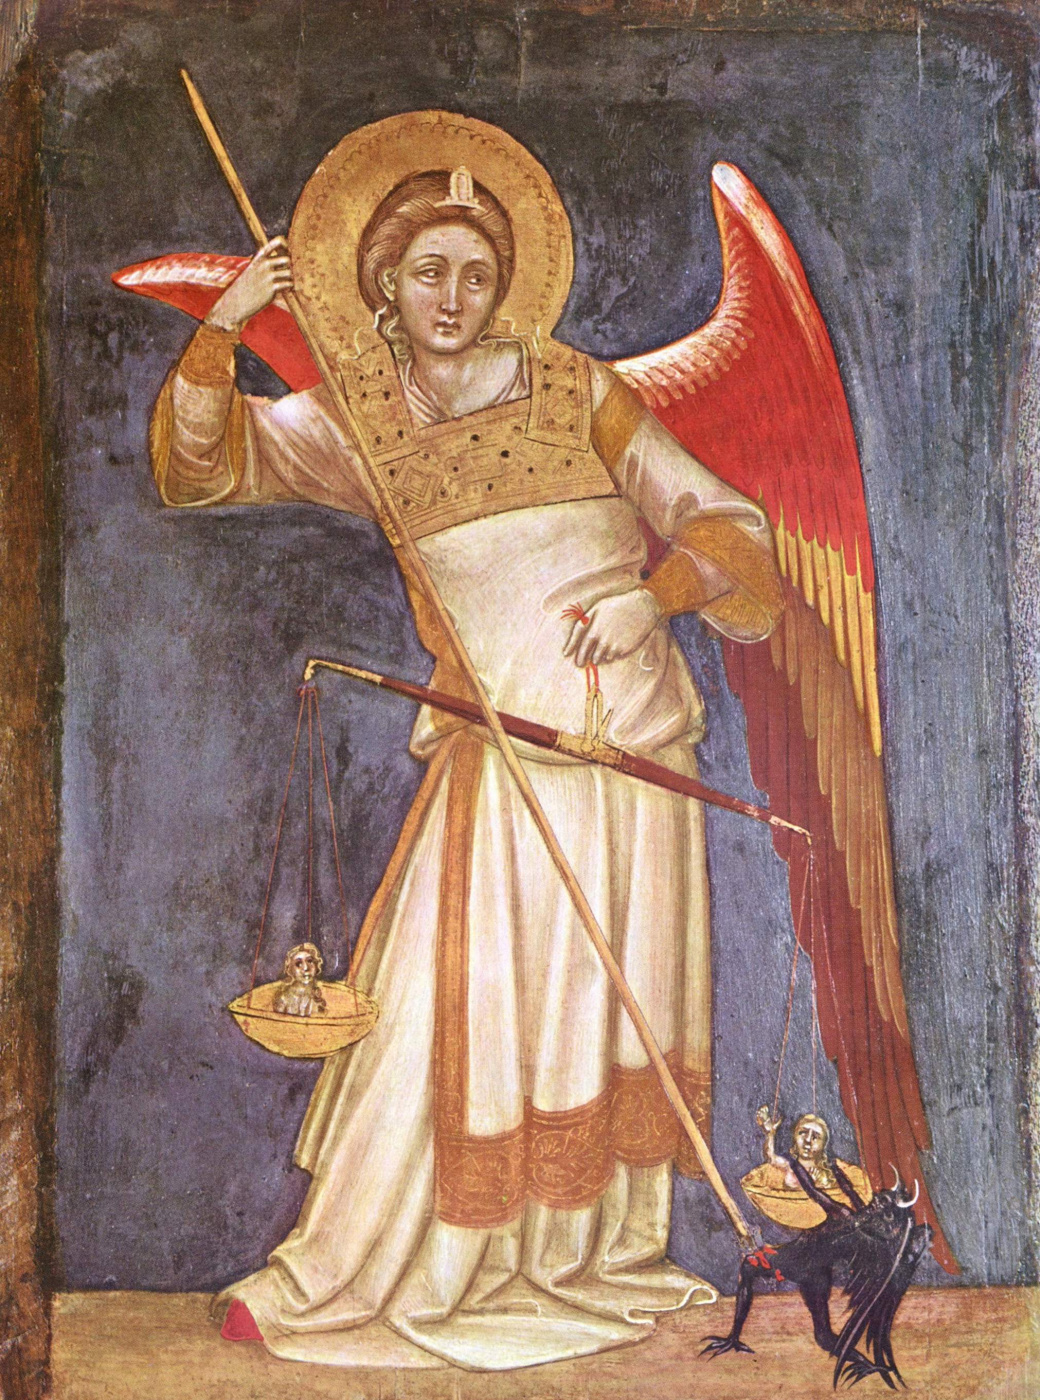 Gvarento d'Arpo. Paintings from the chapel of the Palazzo Carrara in Padua. The Archangel Michael weighing a soul